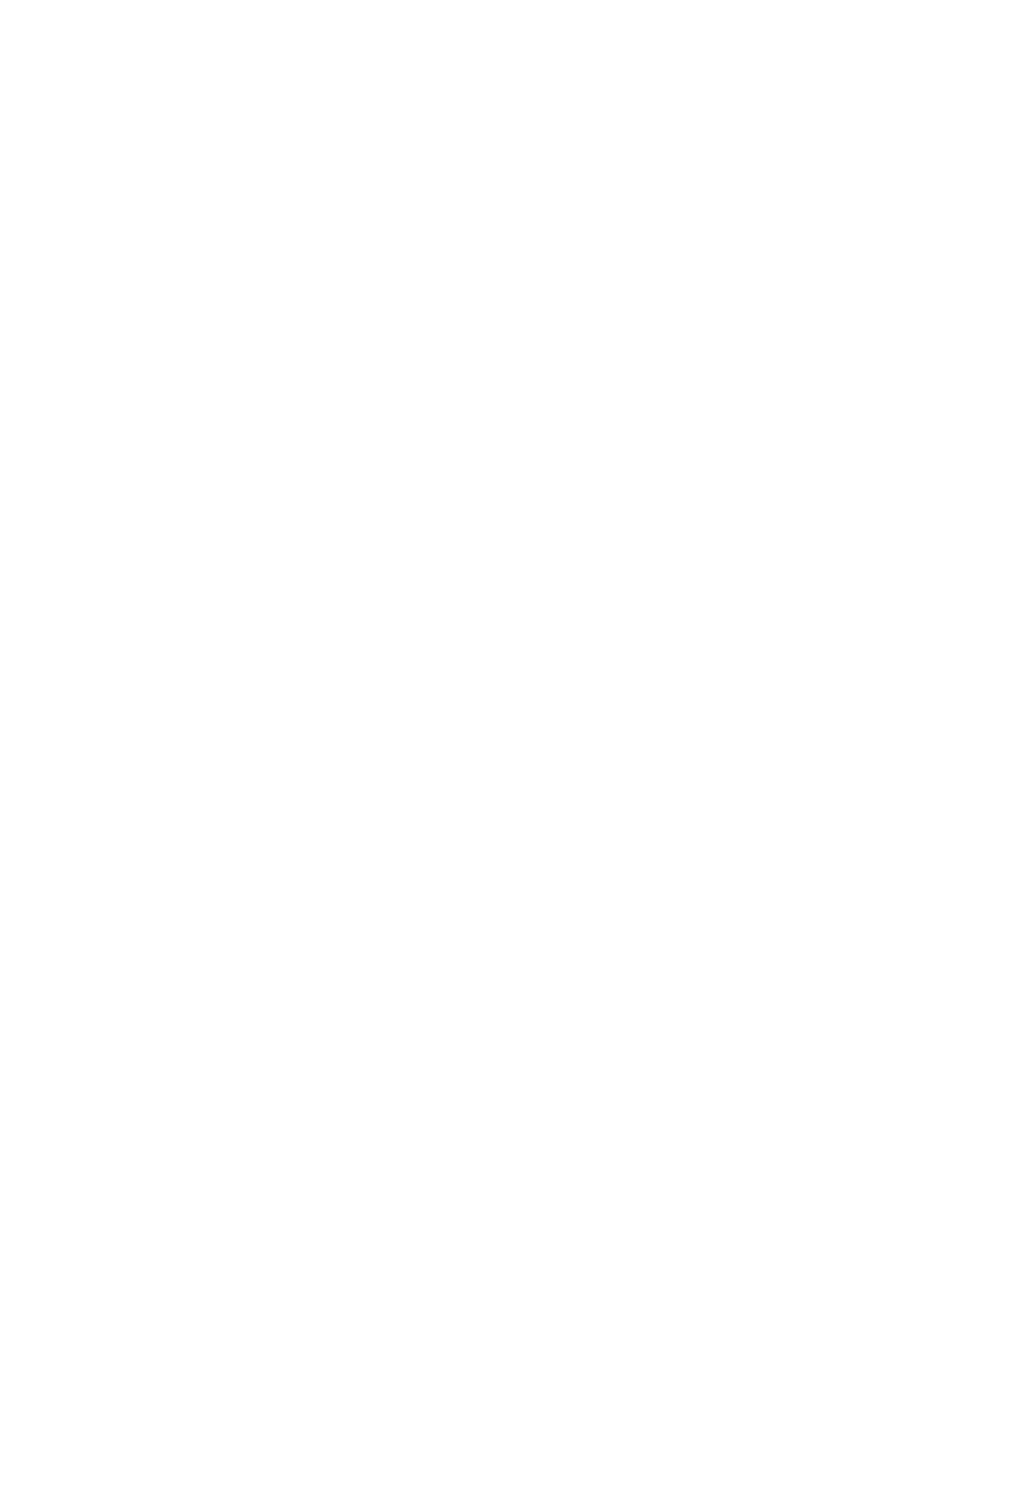 SAVE THE DOGS AND OTHER ANIMALS ONLUS